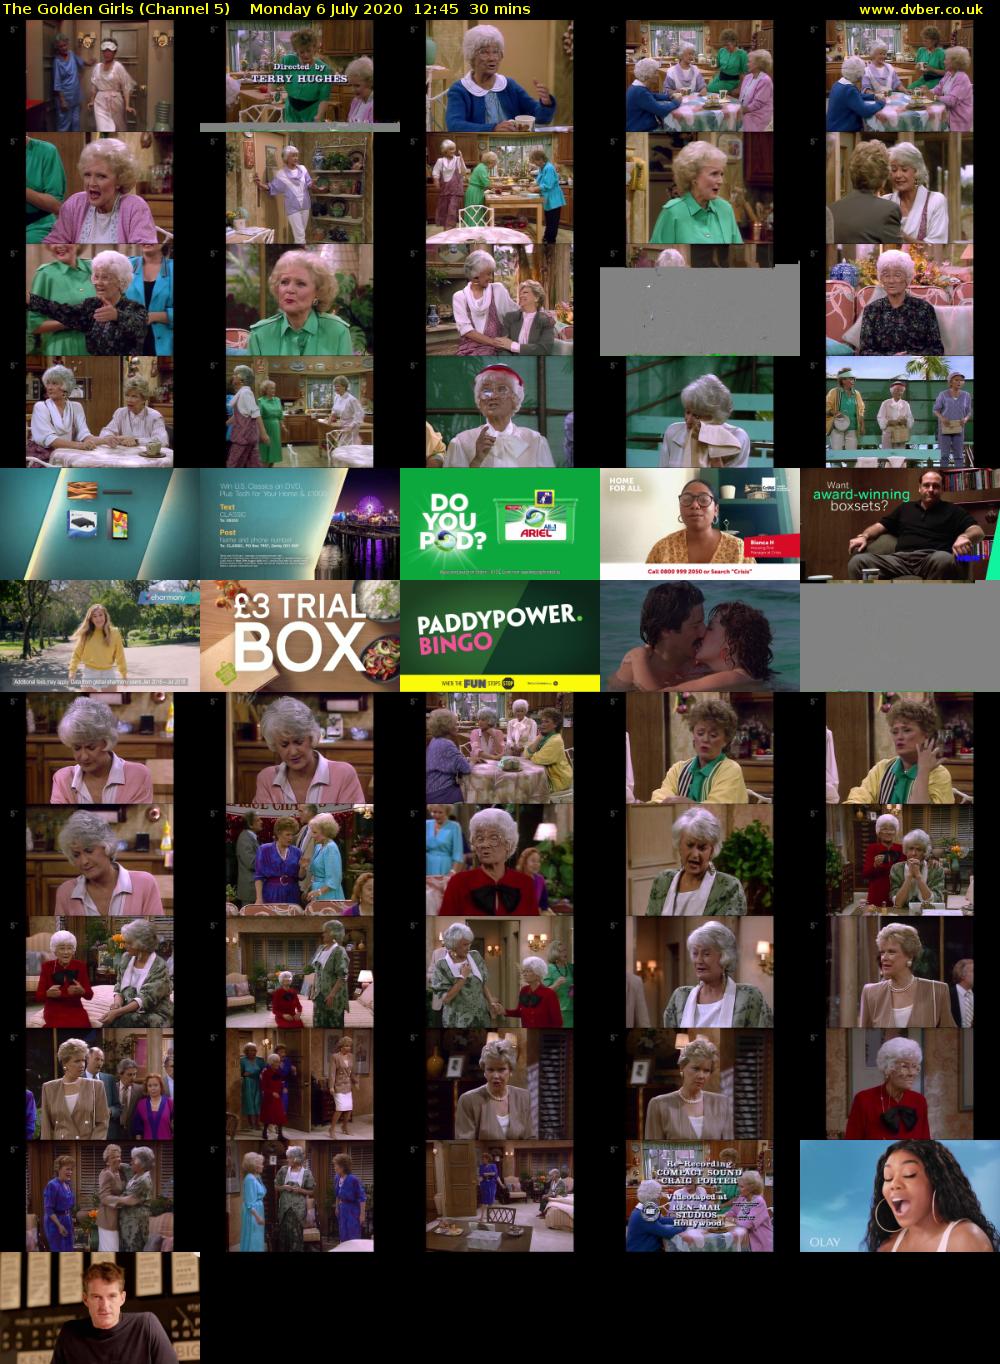 The Golden Girls (Channel 5) Monday 6 July 2020 12:45 - 13:15